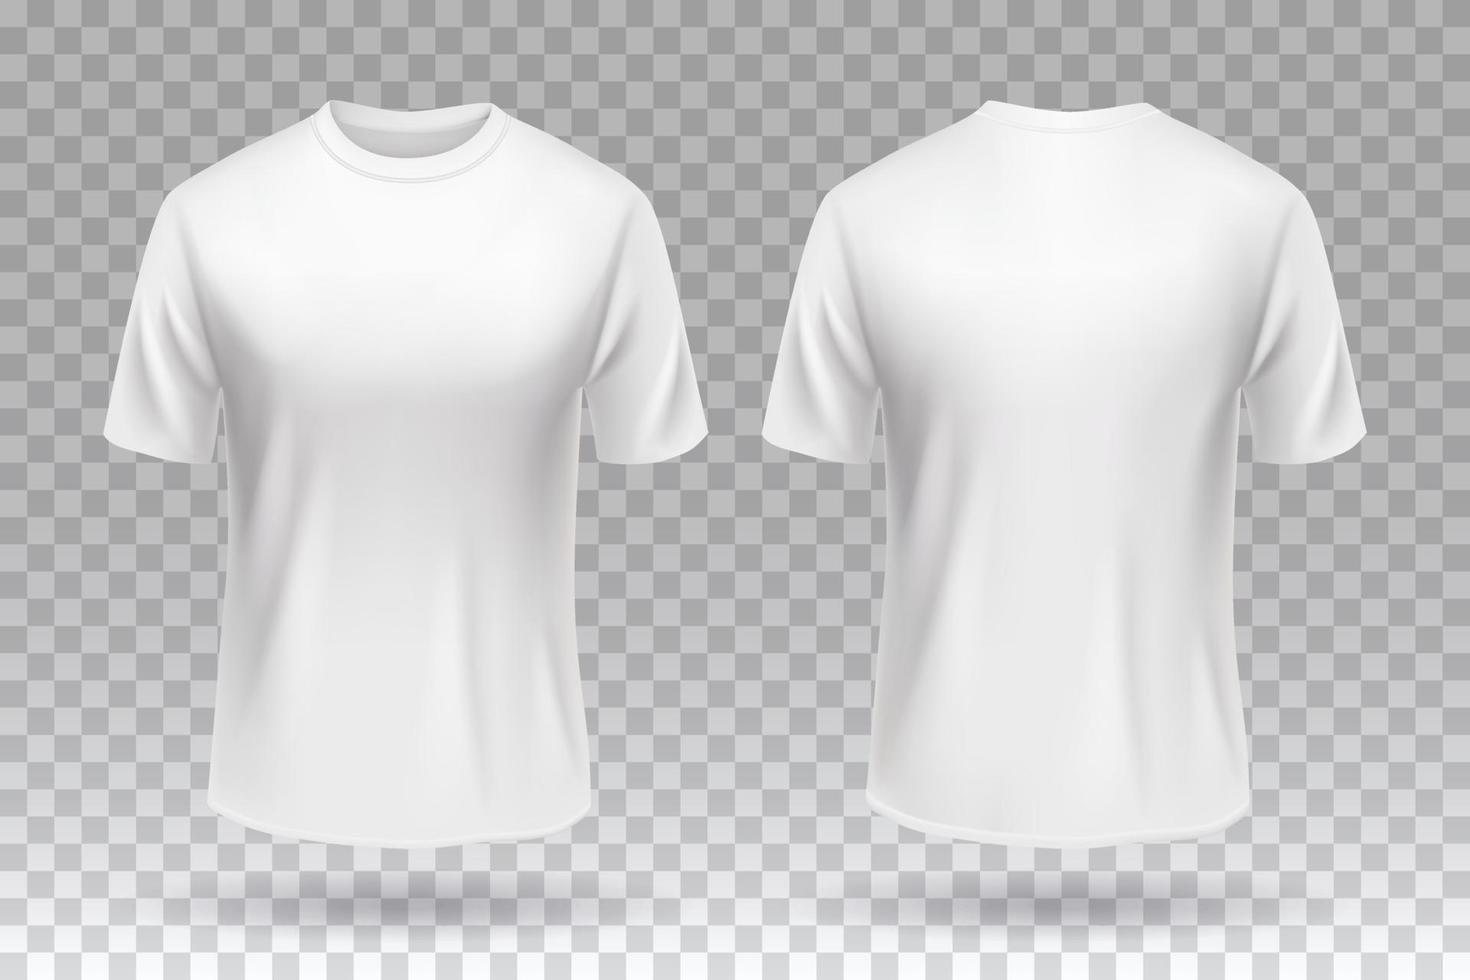 https://static.vecteezy.com/system/resources/previews/002/326/898/non_2x/white-blank-t-shirt-front-and-back-template-mockup-design-isolated-vector.jpg